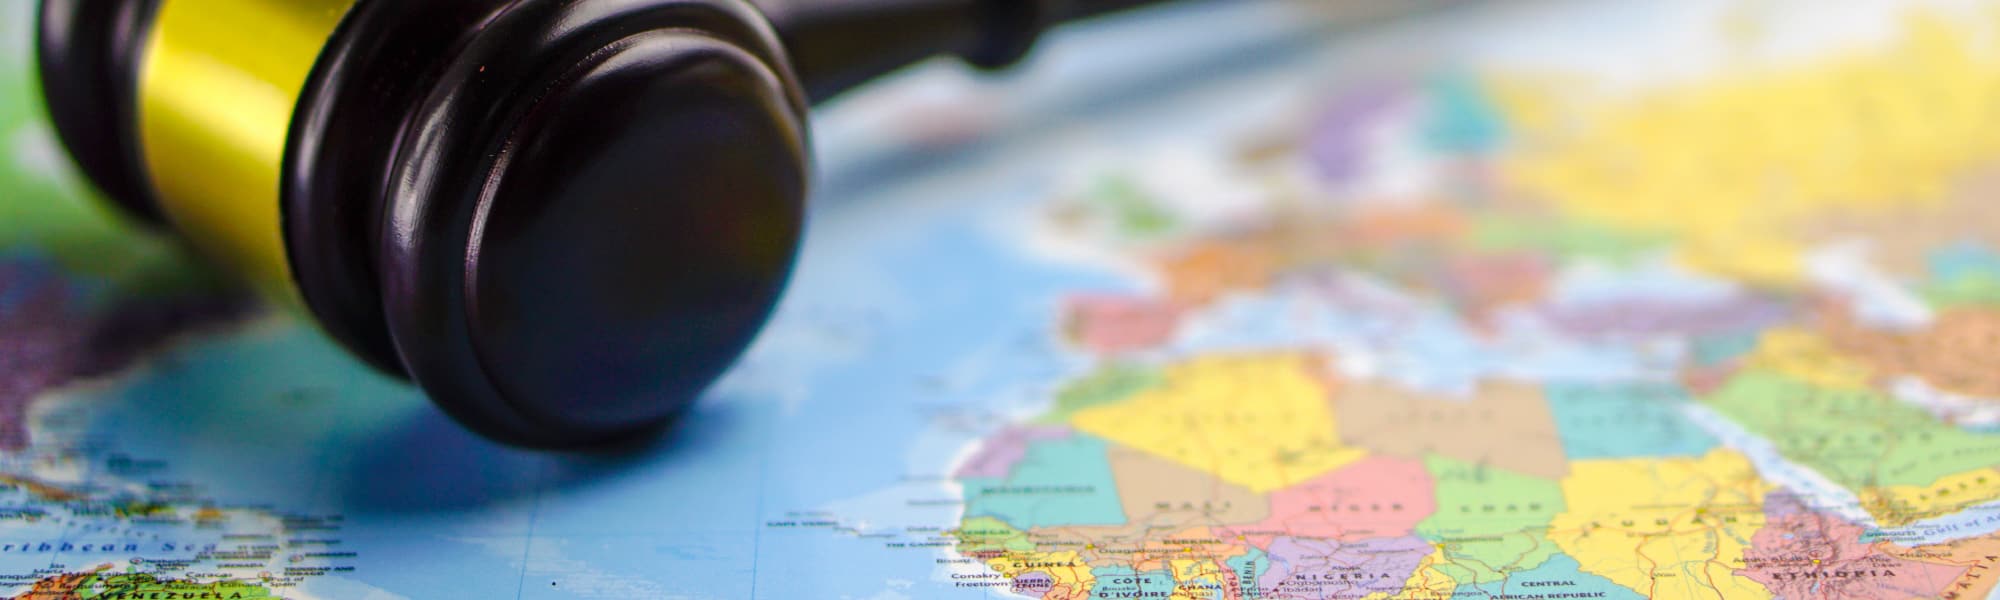 A photo showing a gavel and world map